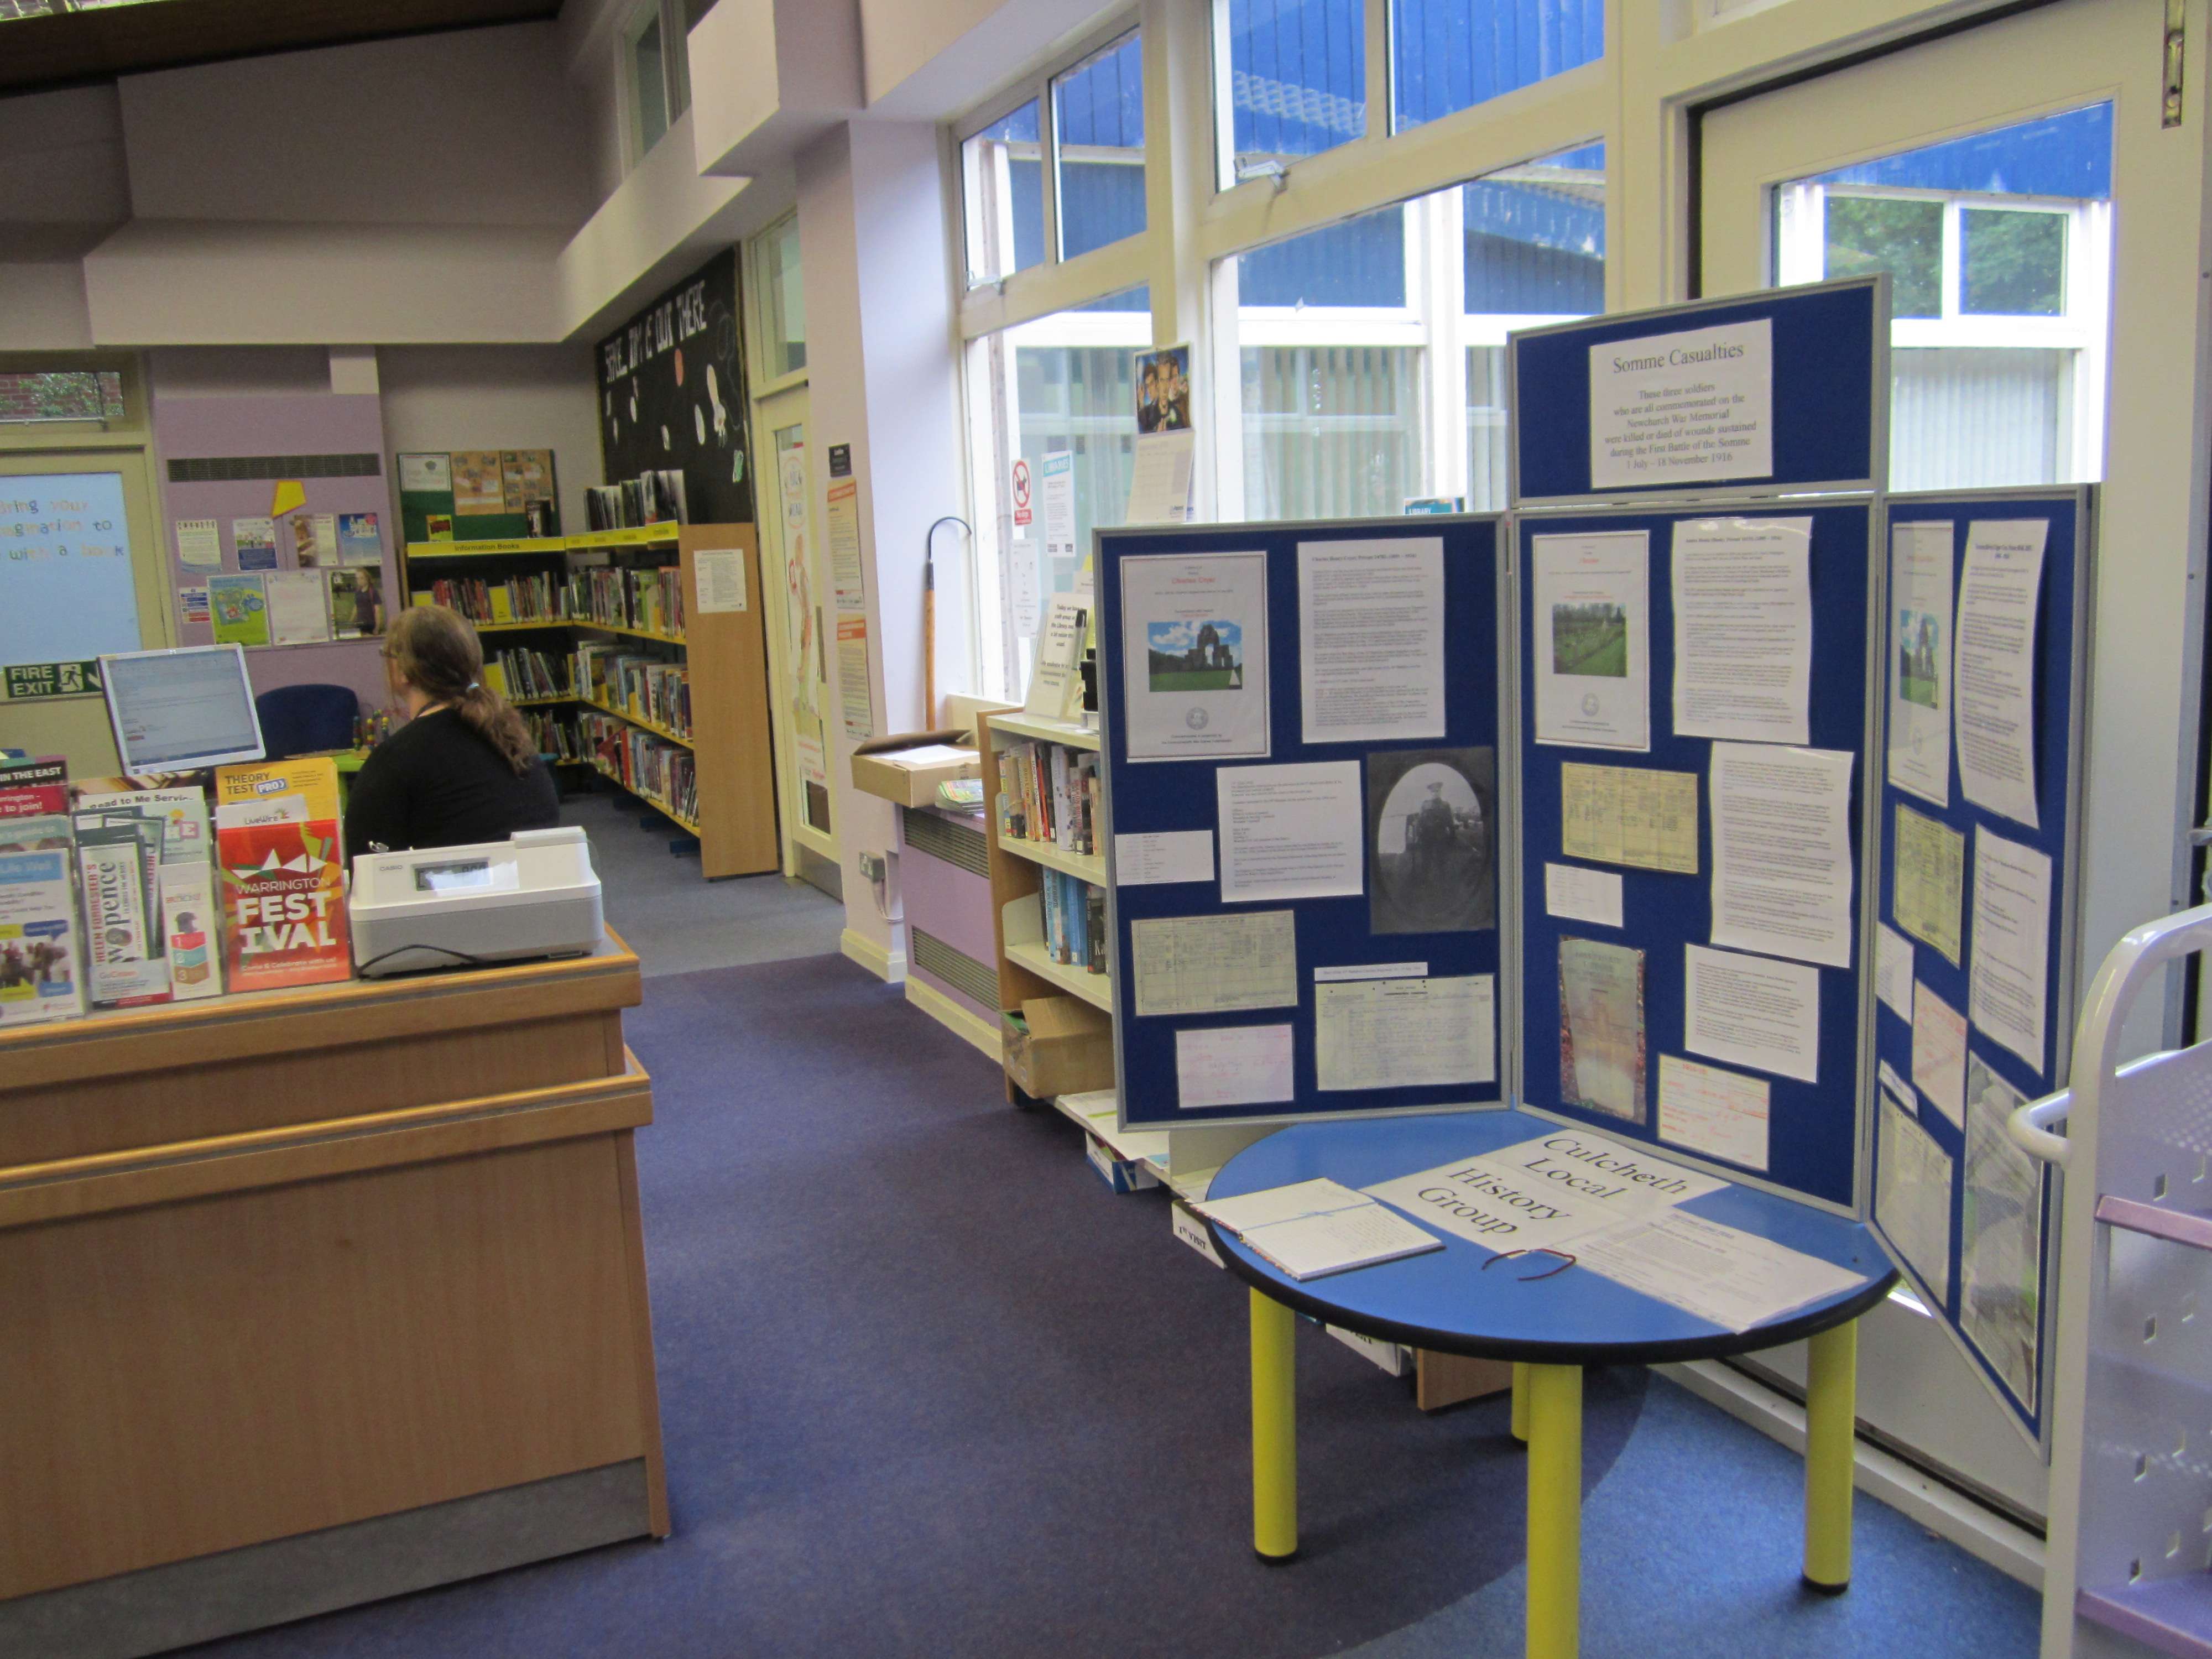 Somme Display in Culcheth Library